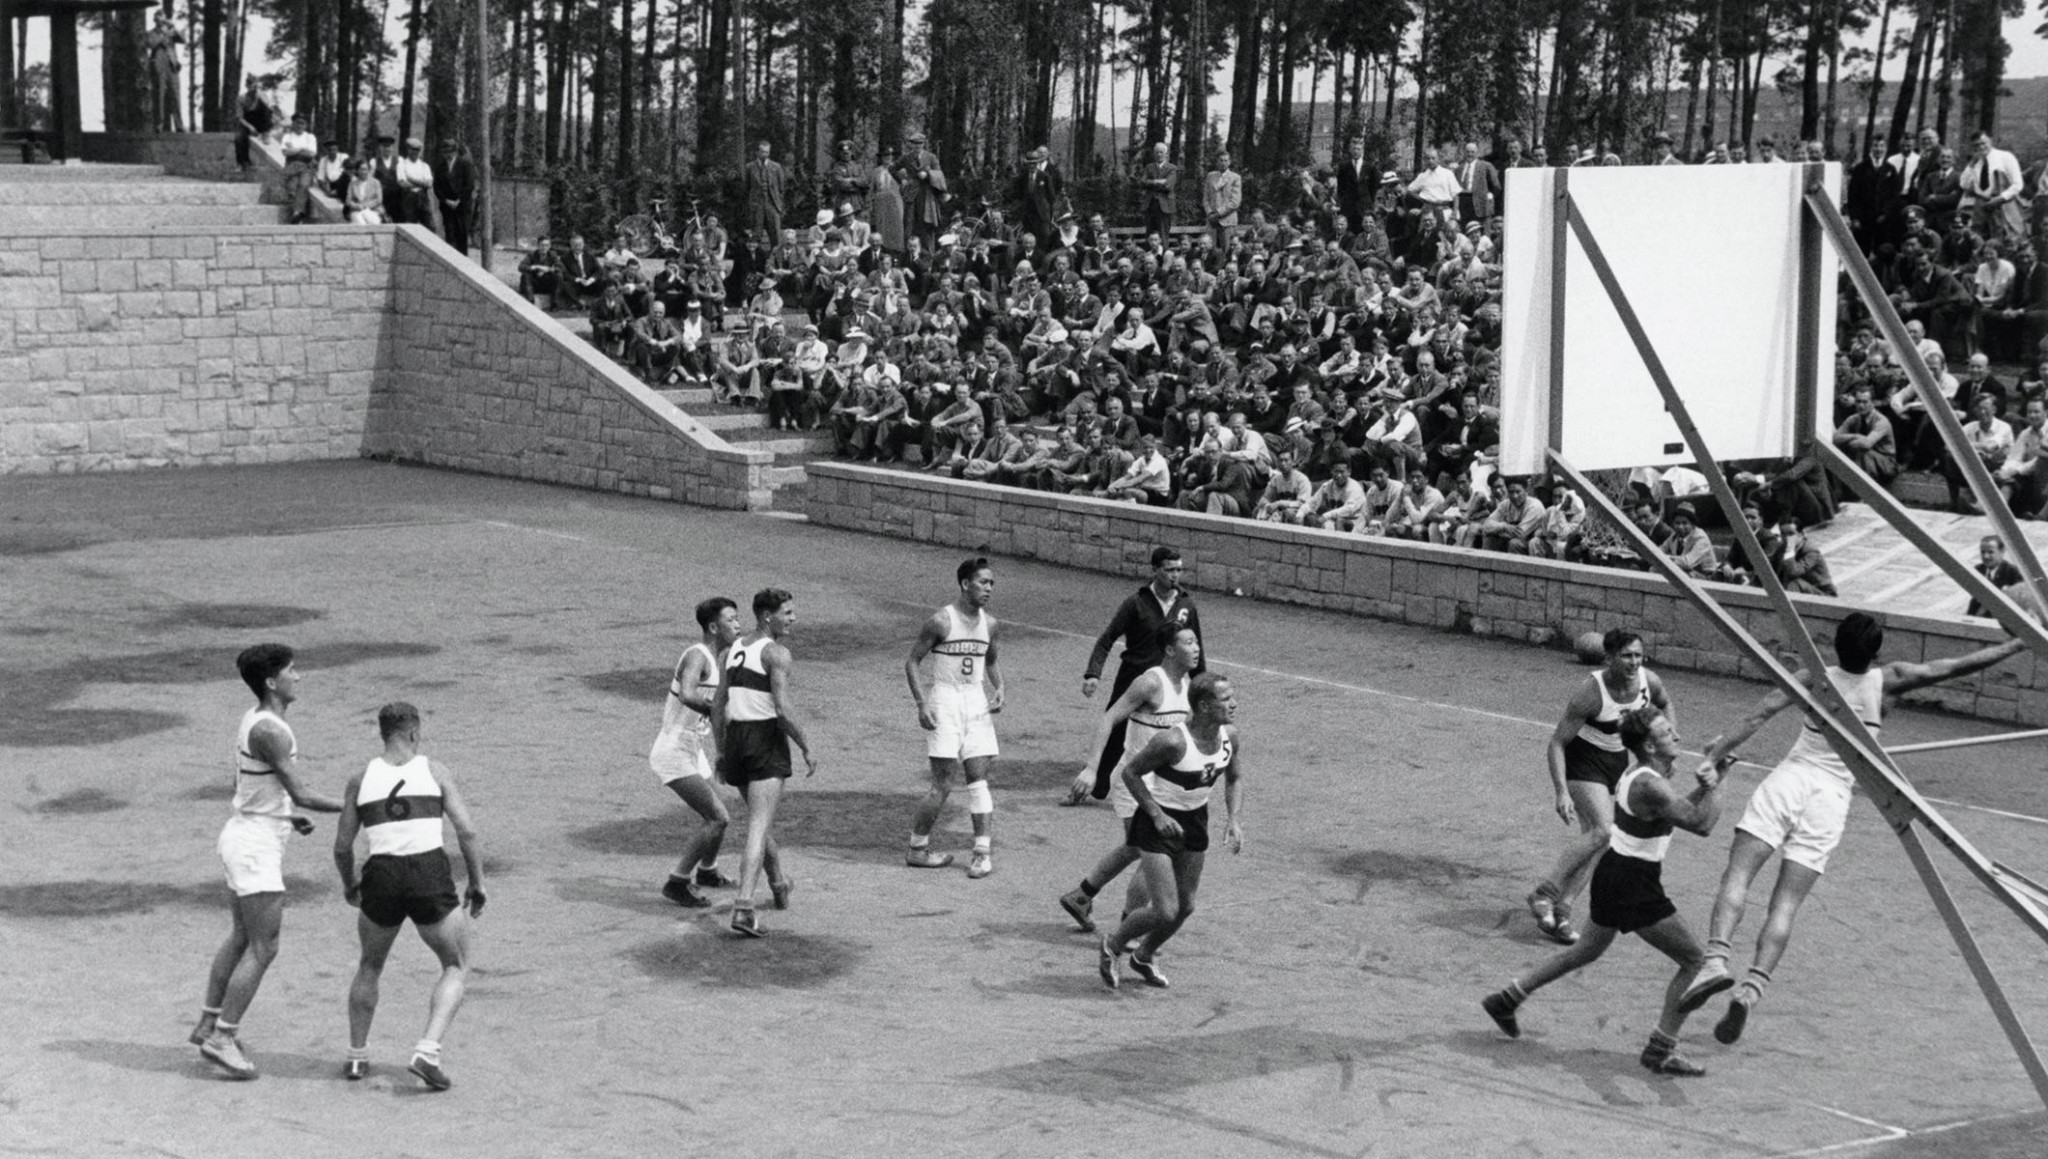 Basketball made its Olympic debut at Berlin 1936 but, as an experiment, was played outside on lawn tennis courts ©Getty Images